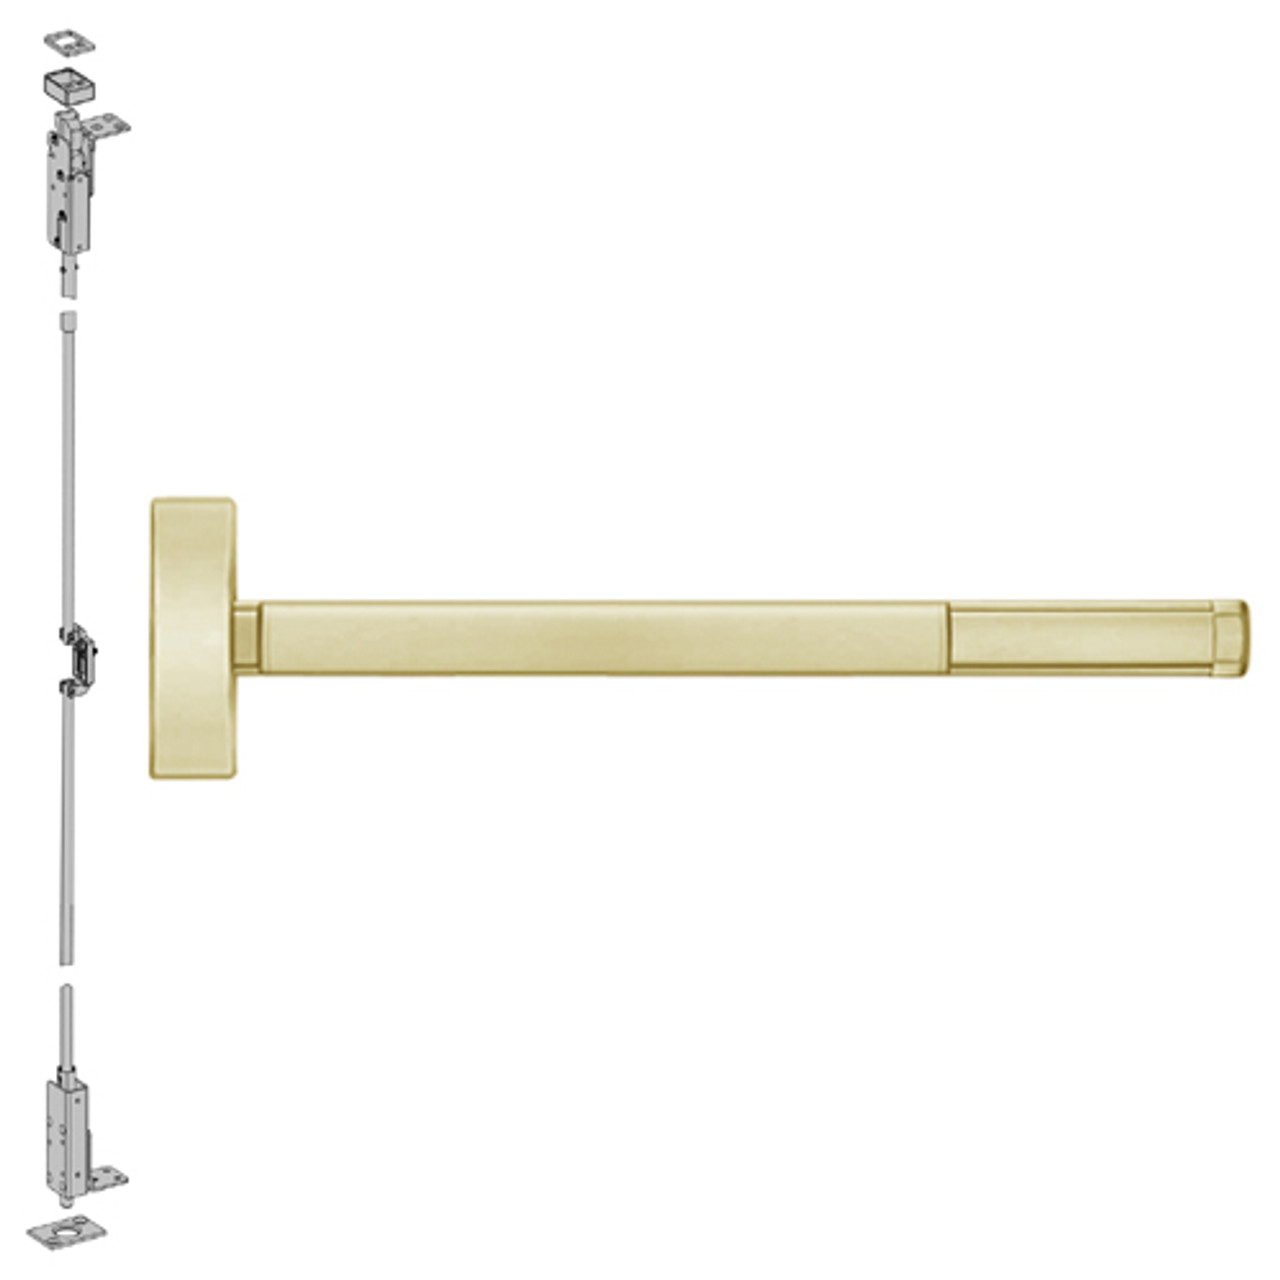 TS2705-606-36 PHI 2700 Series Wood Door Concealed Vertical Exit Device with Touchbar Monitoring Switch Prepped for Key Controls Thumb Piece in Satin Brass Finish